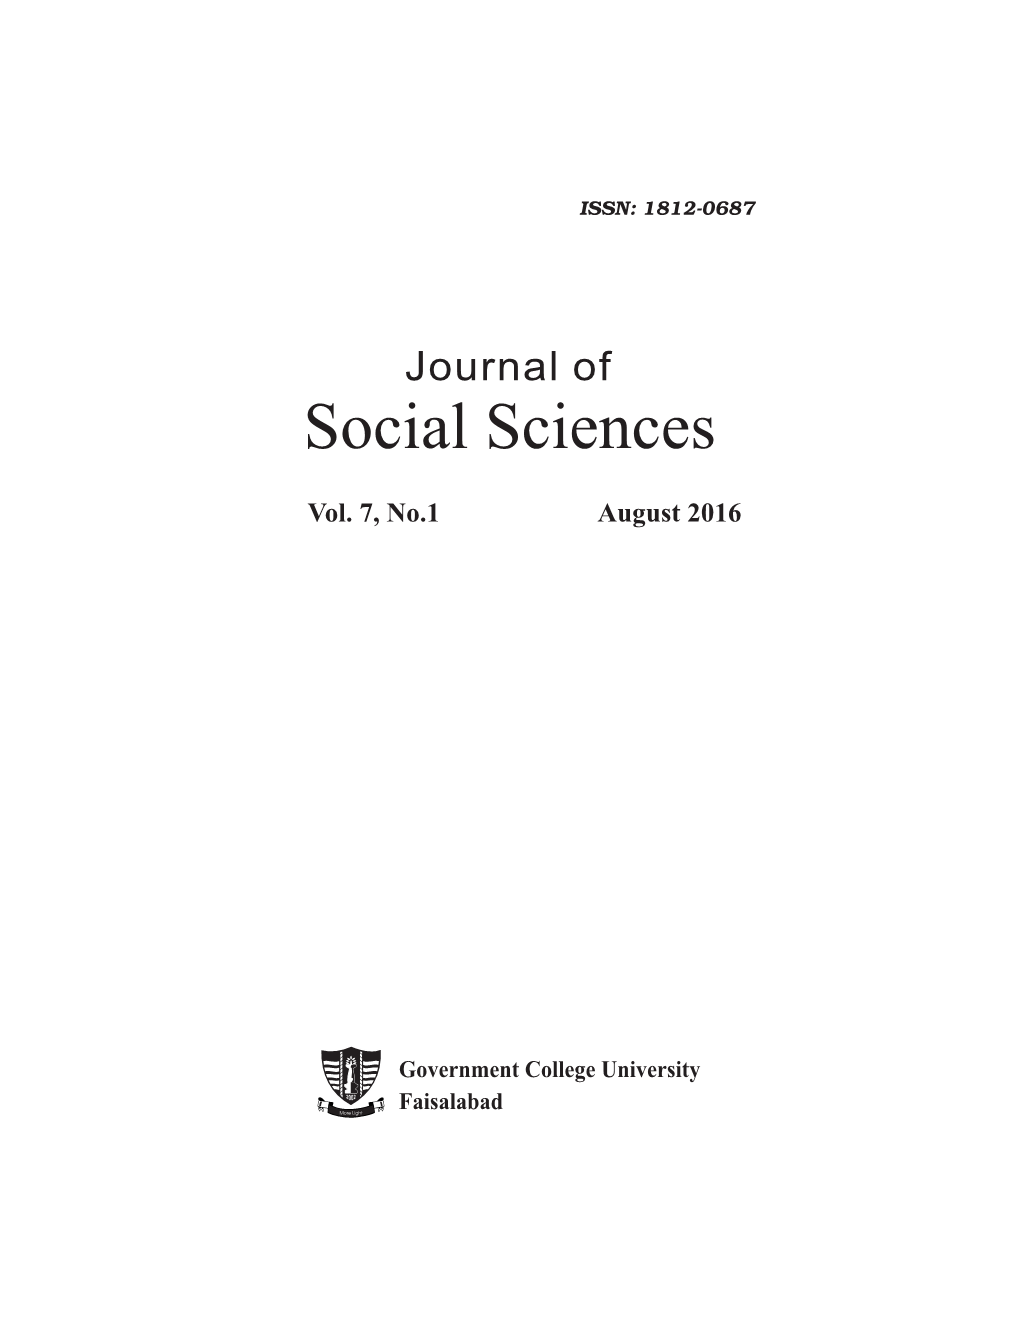 JSS-Vol-7-Issue-1